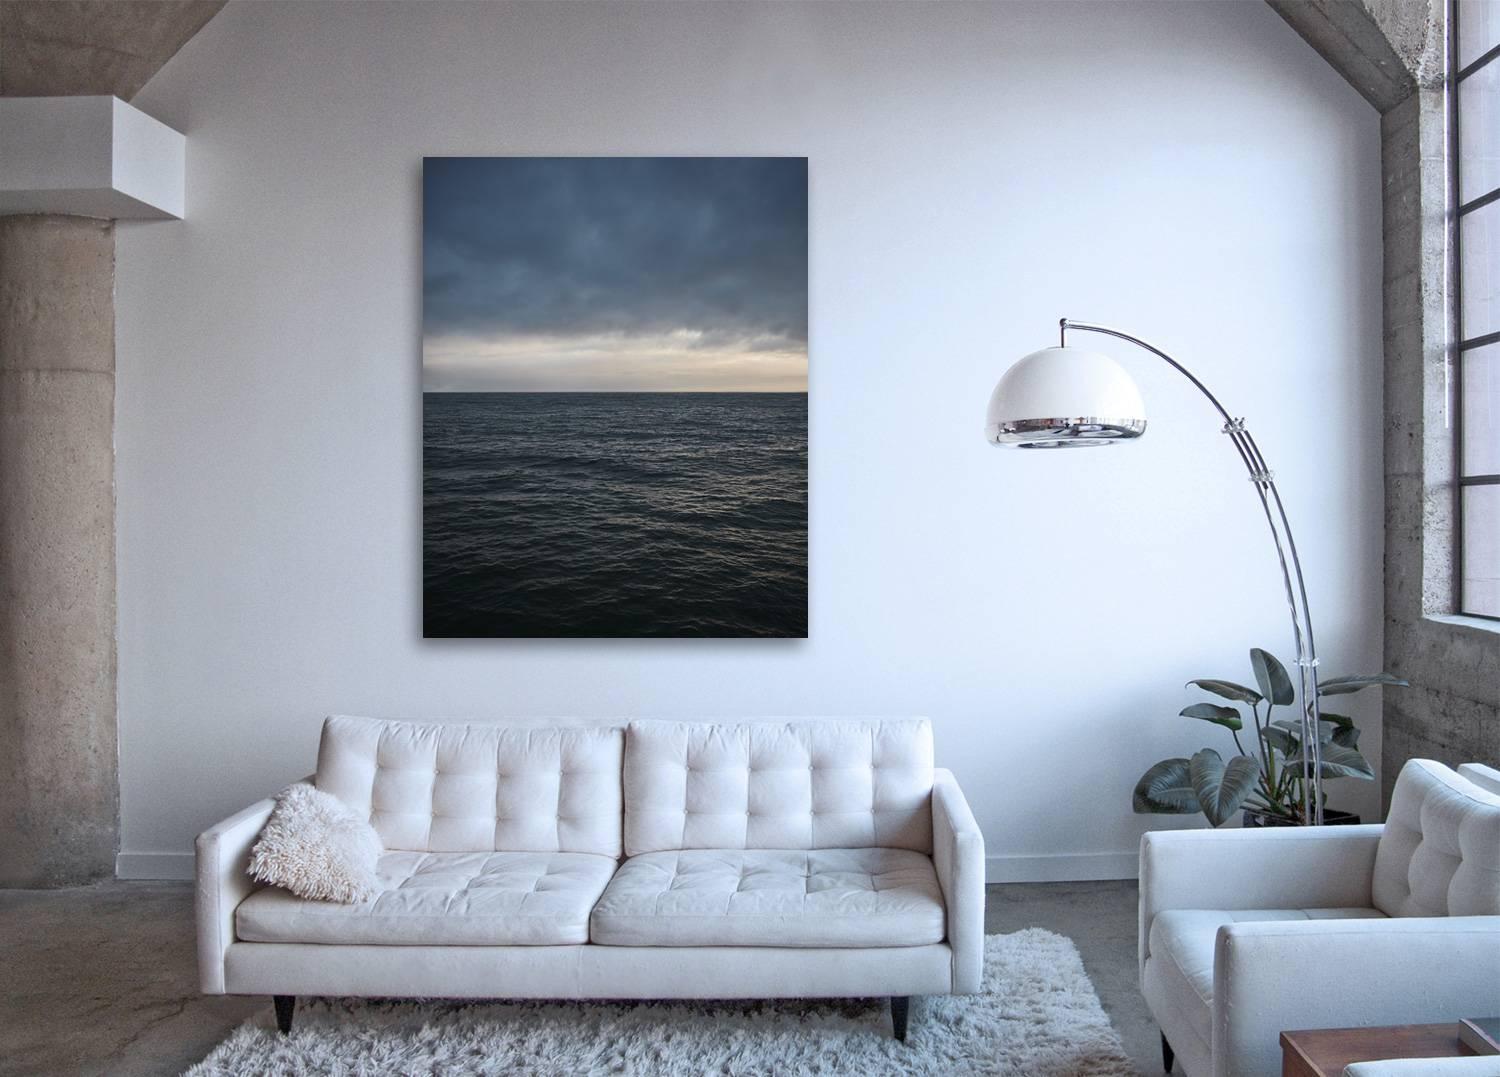 Seascape IV (Homage to Mark Rothko) - framed large format abstract photograph - Photograph by Frank Schott